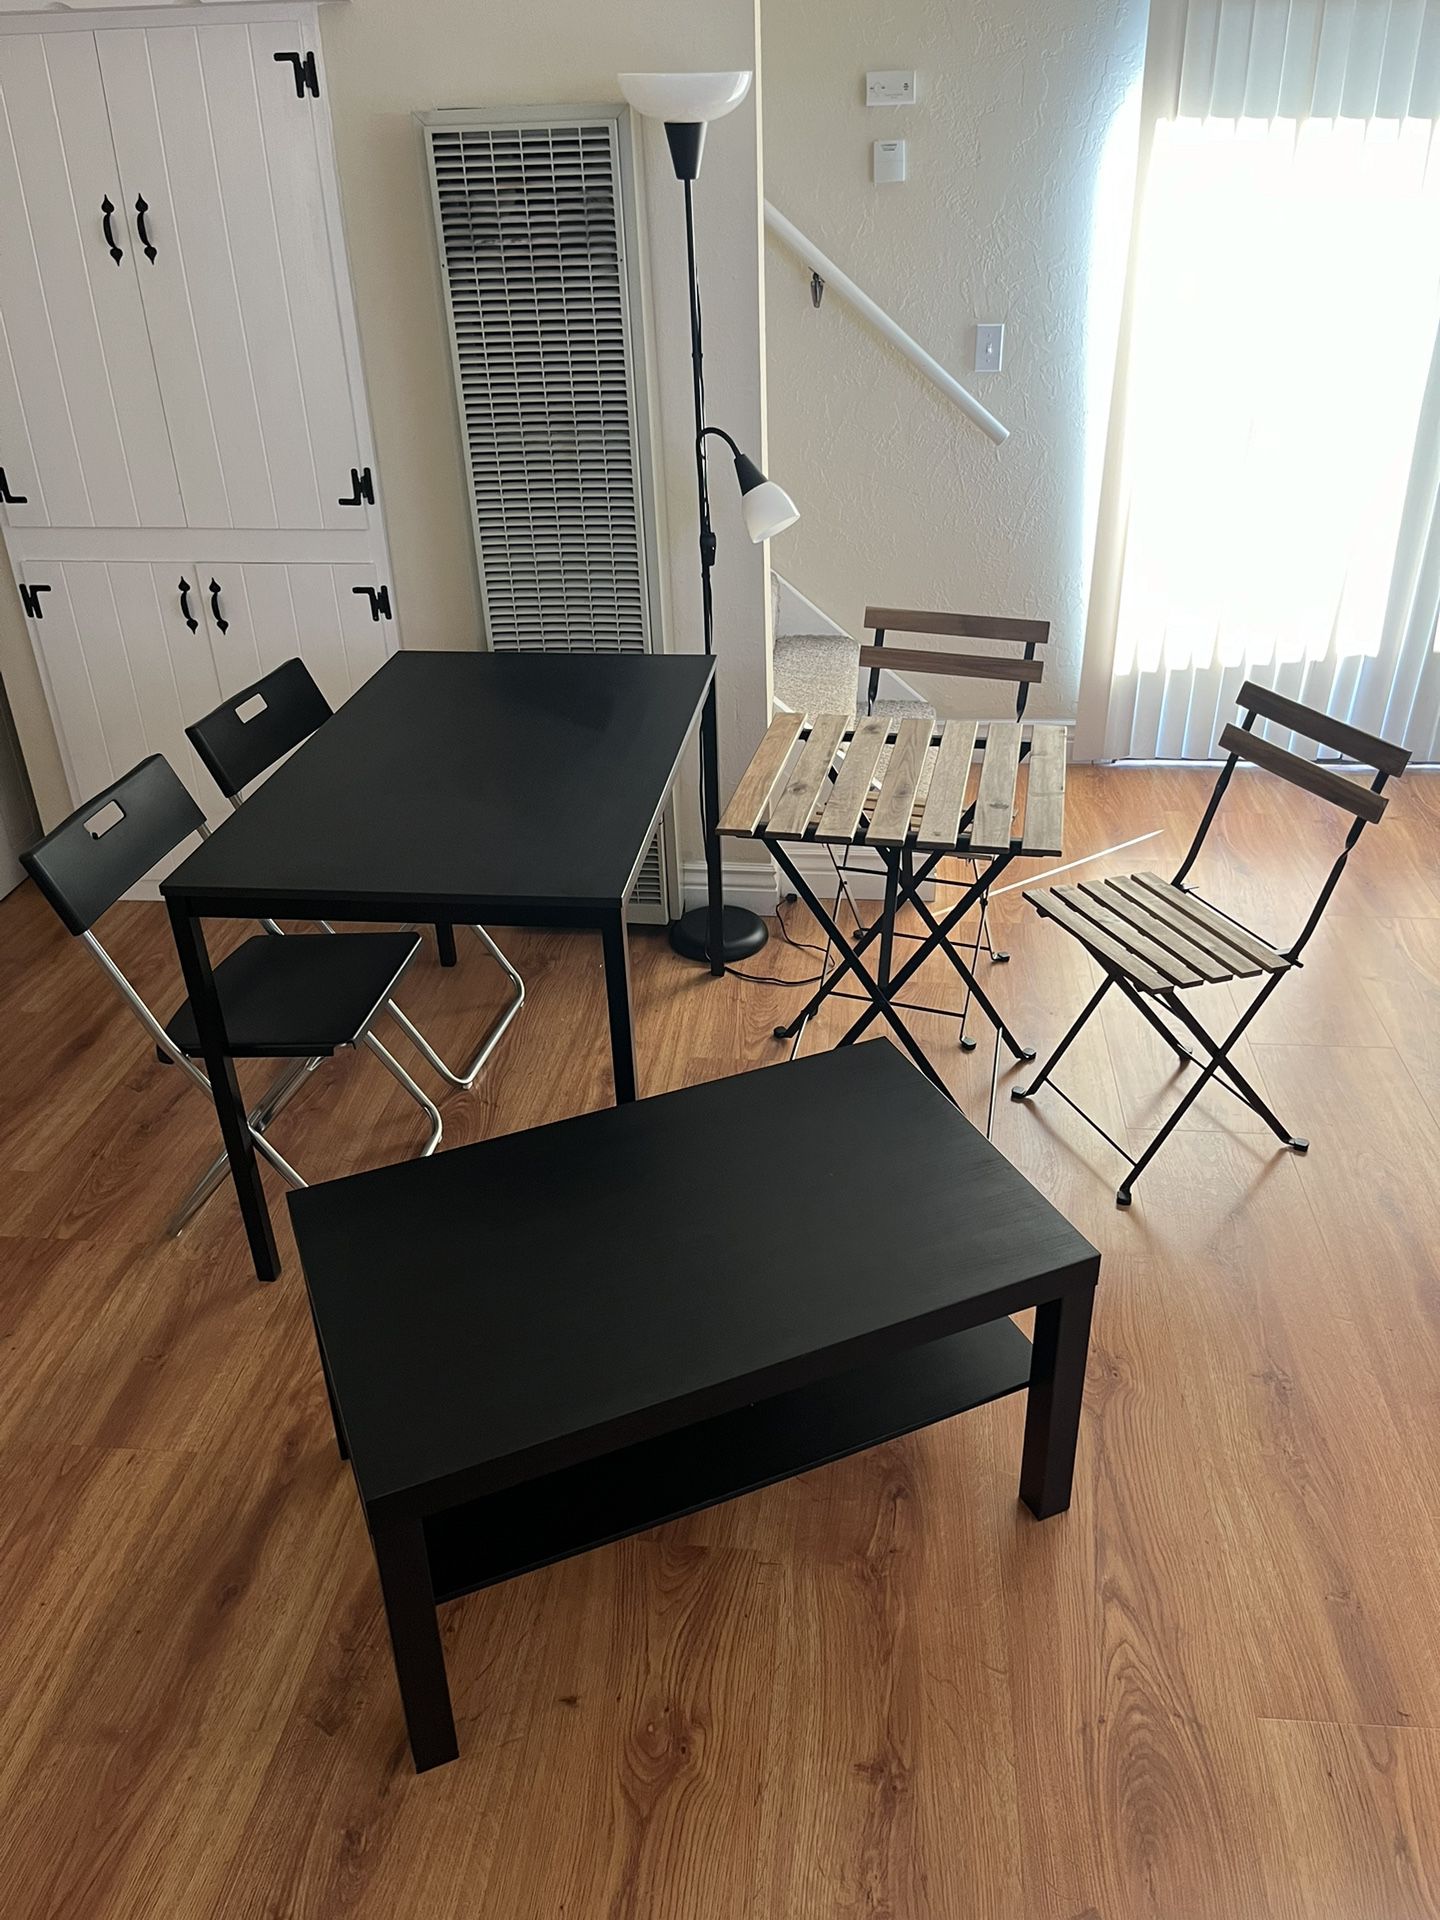 Furniture For Sale: Table, Coffee Table, Chairs, Lamp